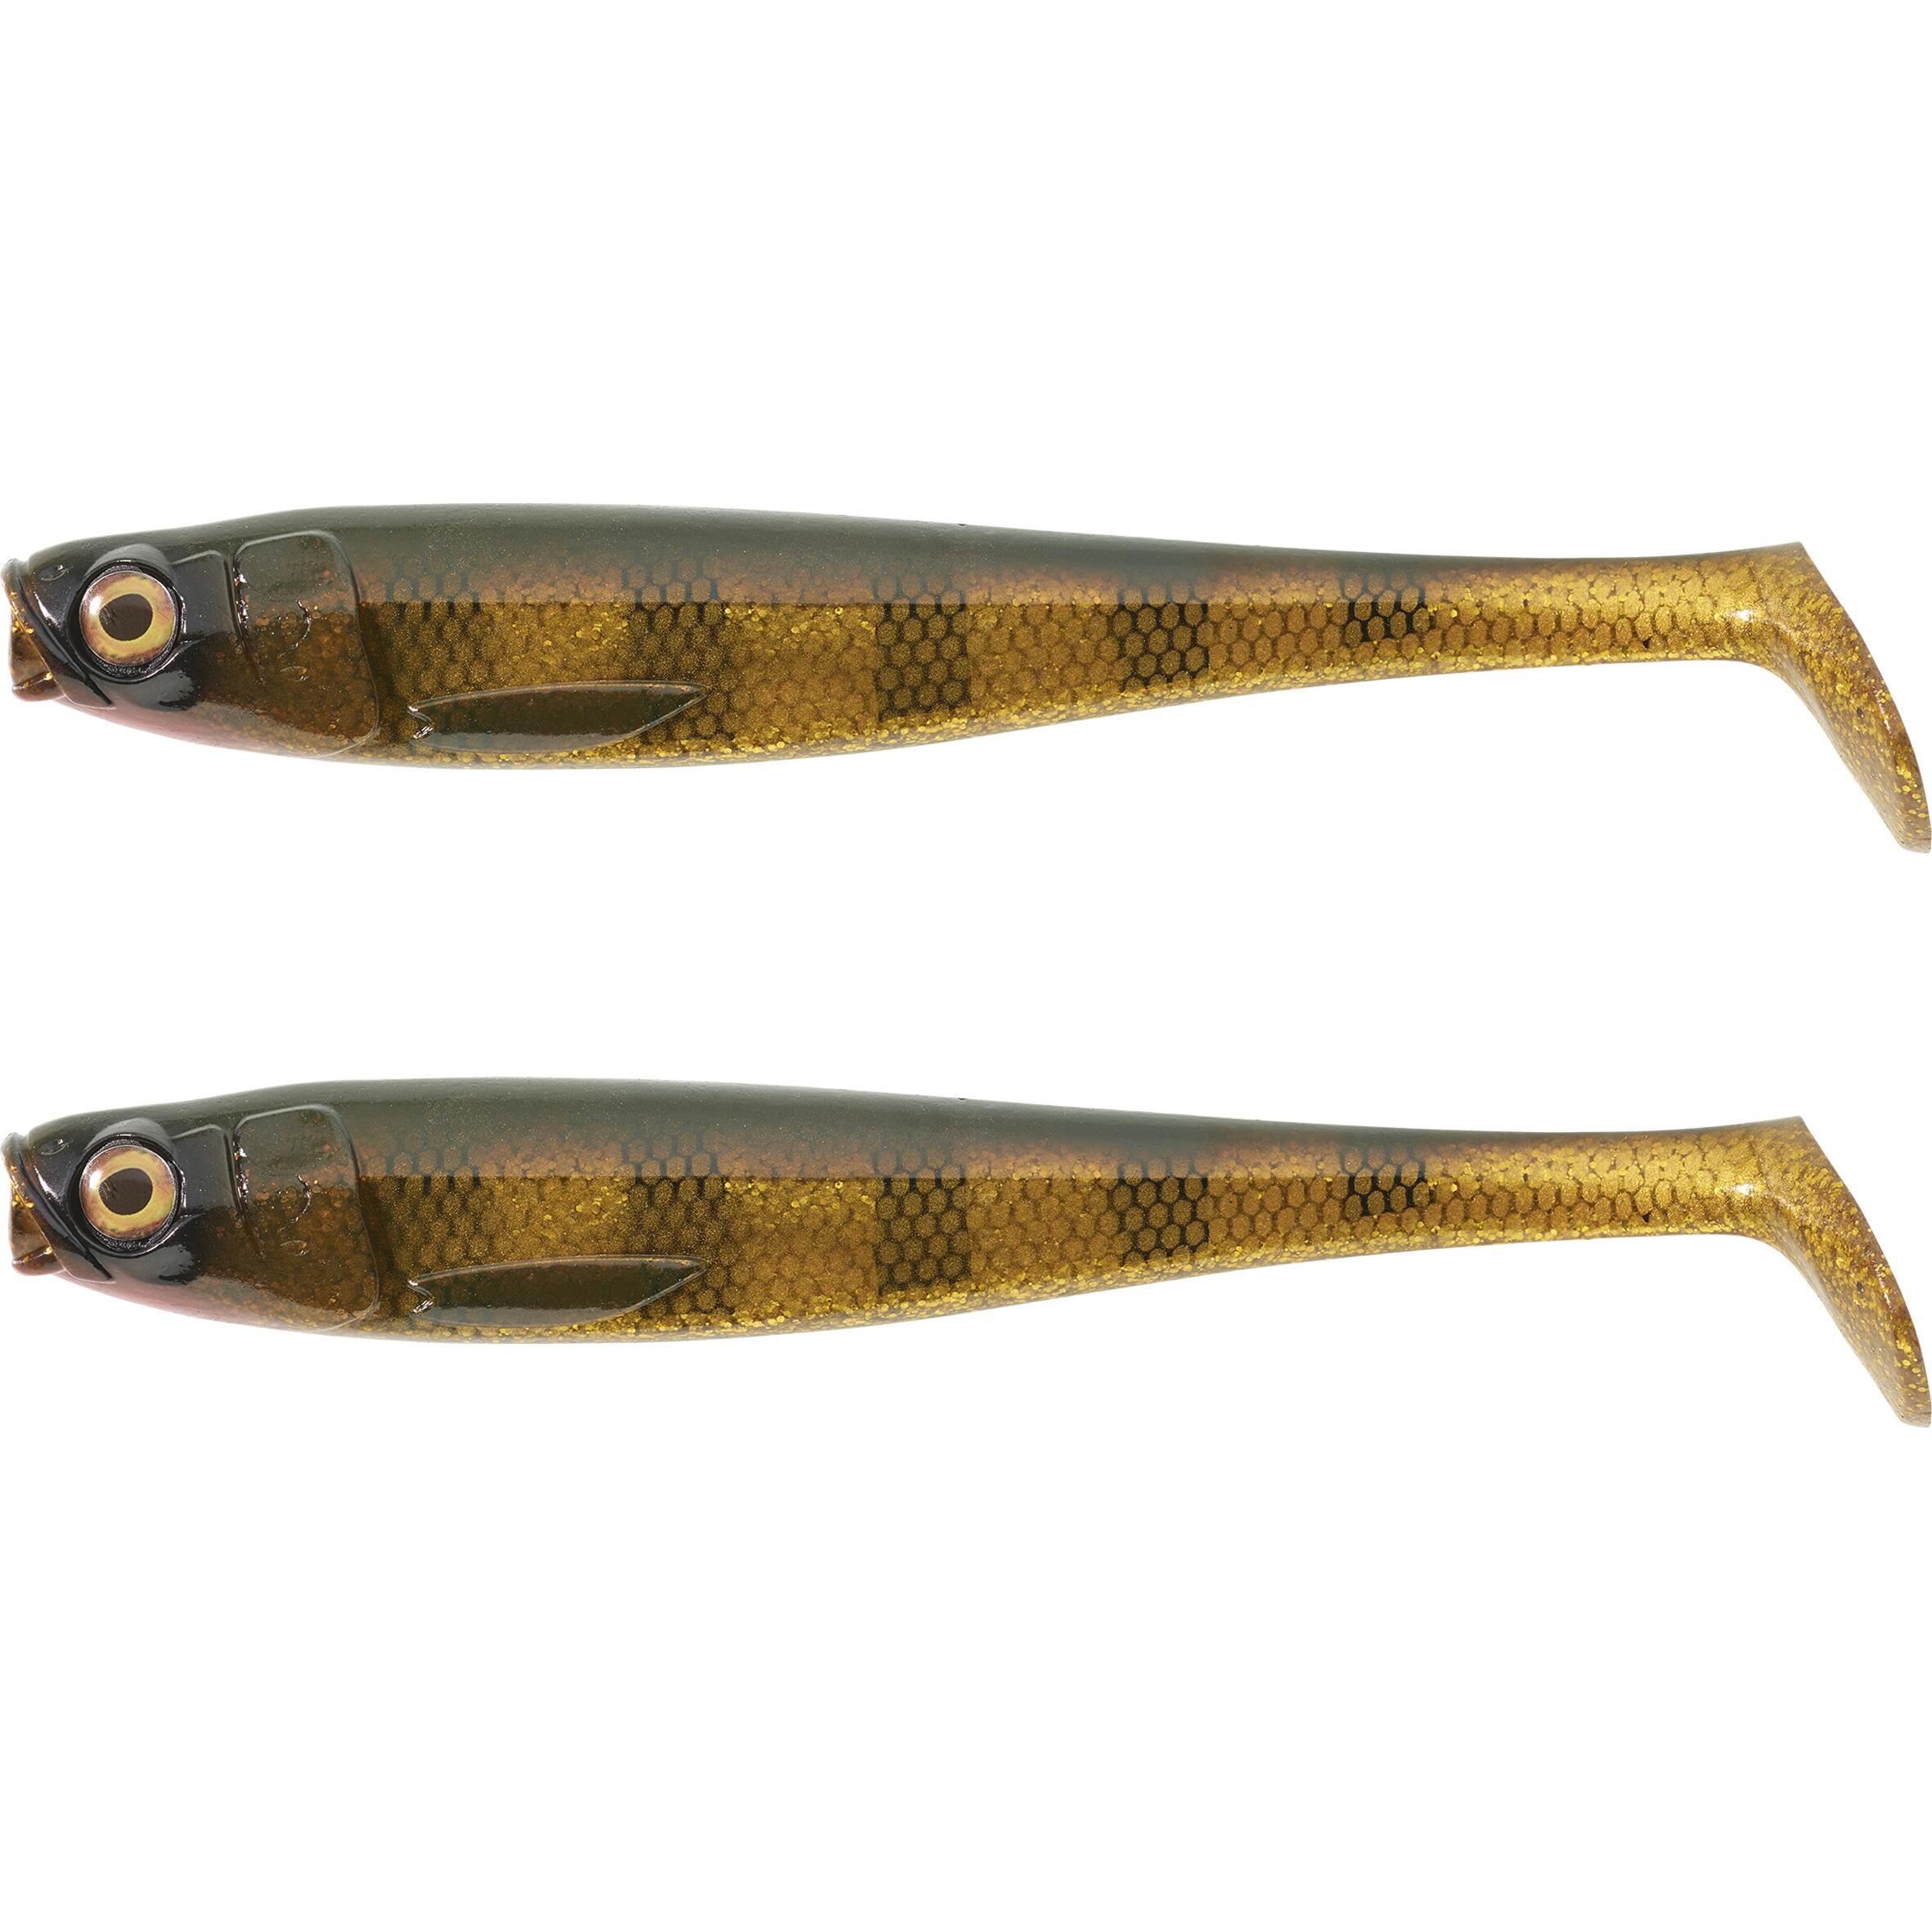 CAPERLAN ROGEN SOFT SHAD PIKE LURE 160 GOLD X2